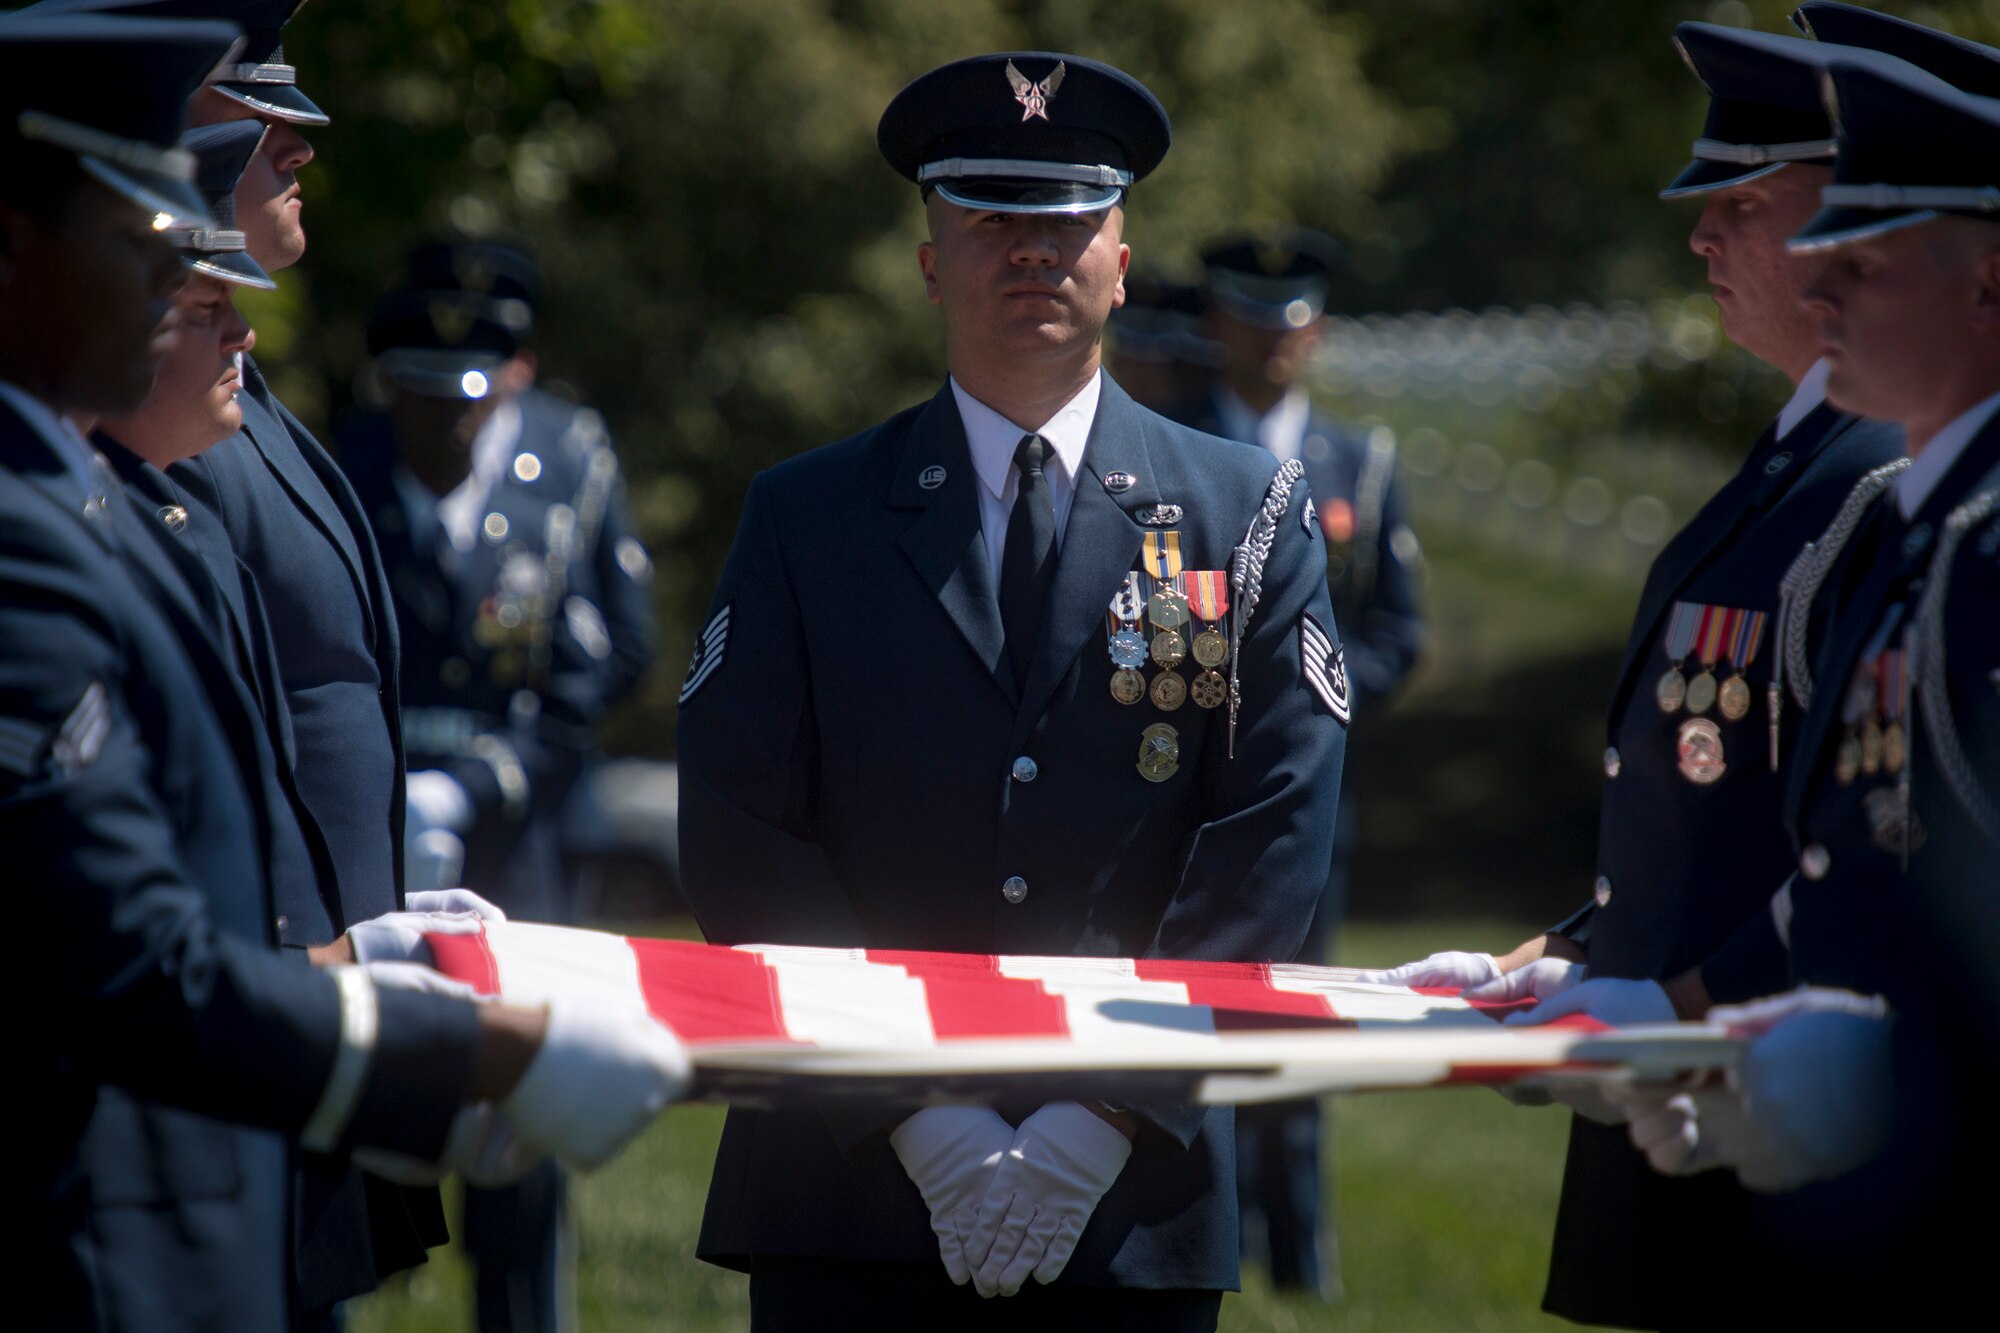 Members of the U.S. Air Force Honor Guard prepare to fold the flag above Capt. Mark Weber’s casket during his funeral service, July 9, 2018, at Arlington National Cemetery, Va. Weber, a 38th Rescue Squadron combat rescue officer and Texas native, was killed in an HH-60G Pave Hawk crash in Anbar Province, Iraq, March 15. Friends, family, and Guardian Angel Airmen traveled from across the U.S. to attend the ceremony and pay their final respects. (U.S. Air Force photo by Staff Sgt. Ryan Callaghan)